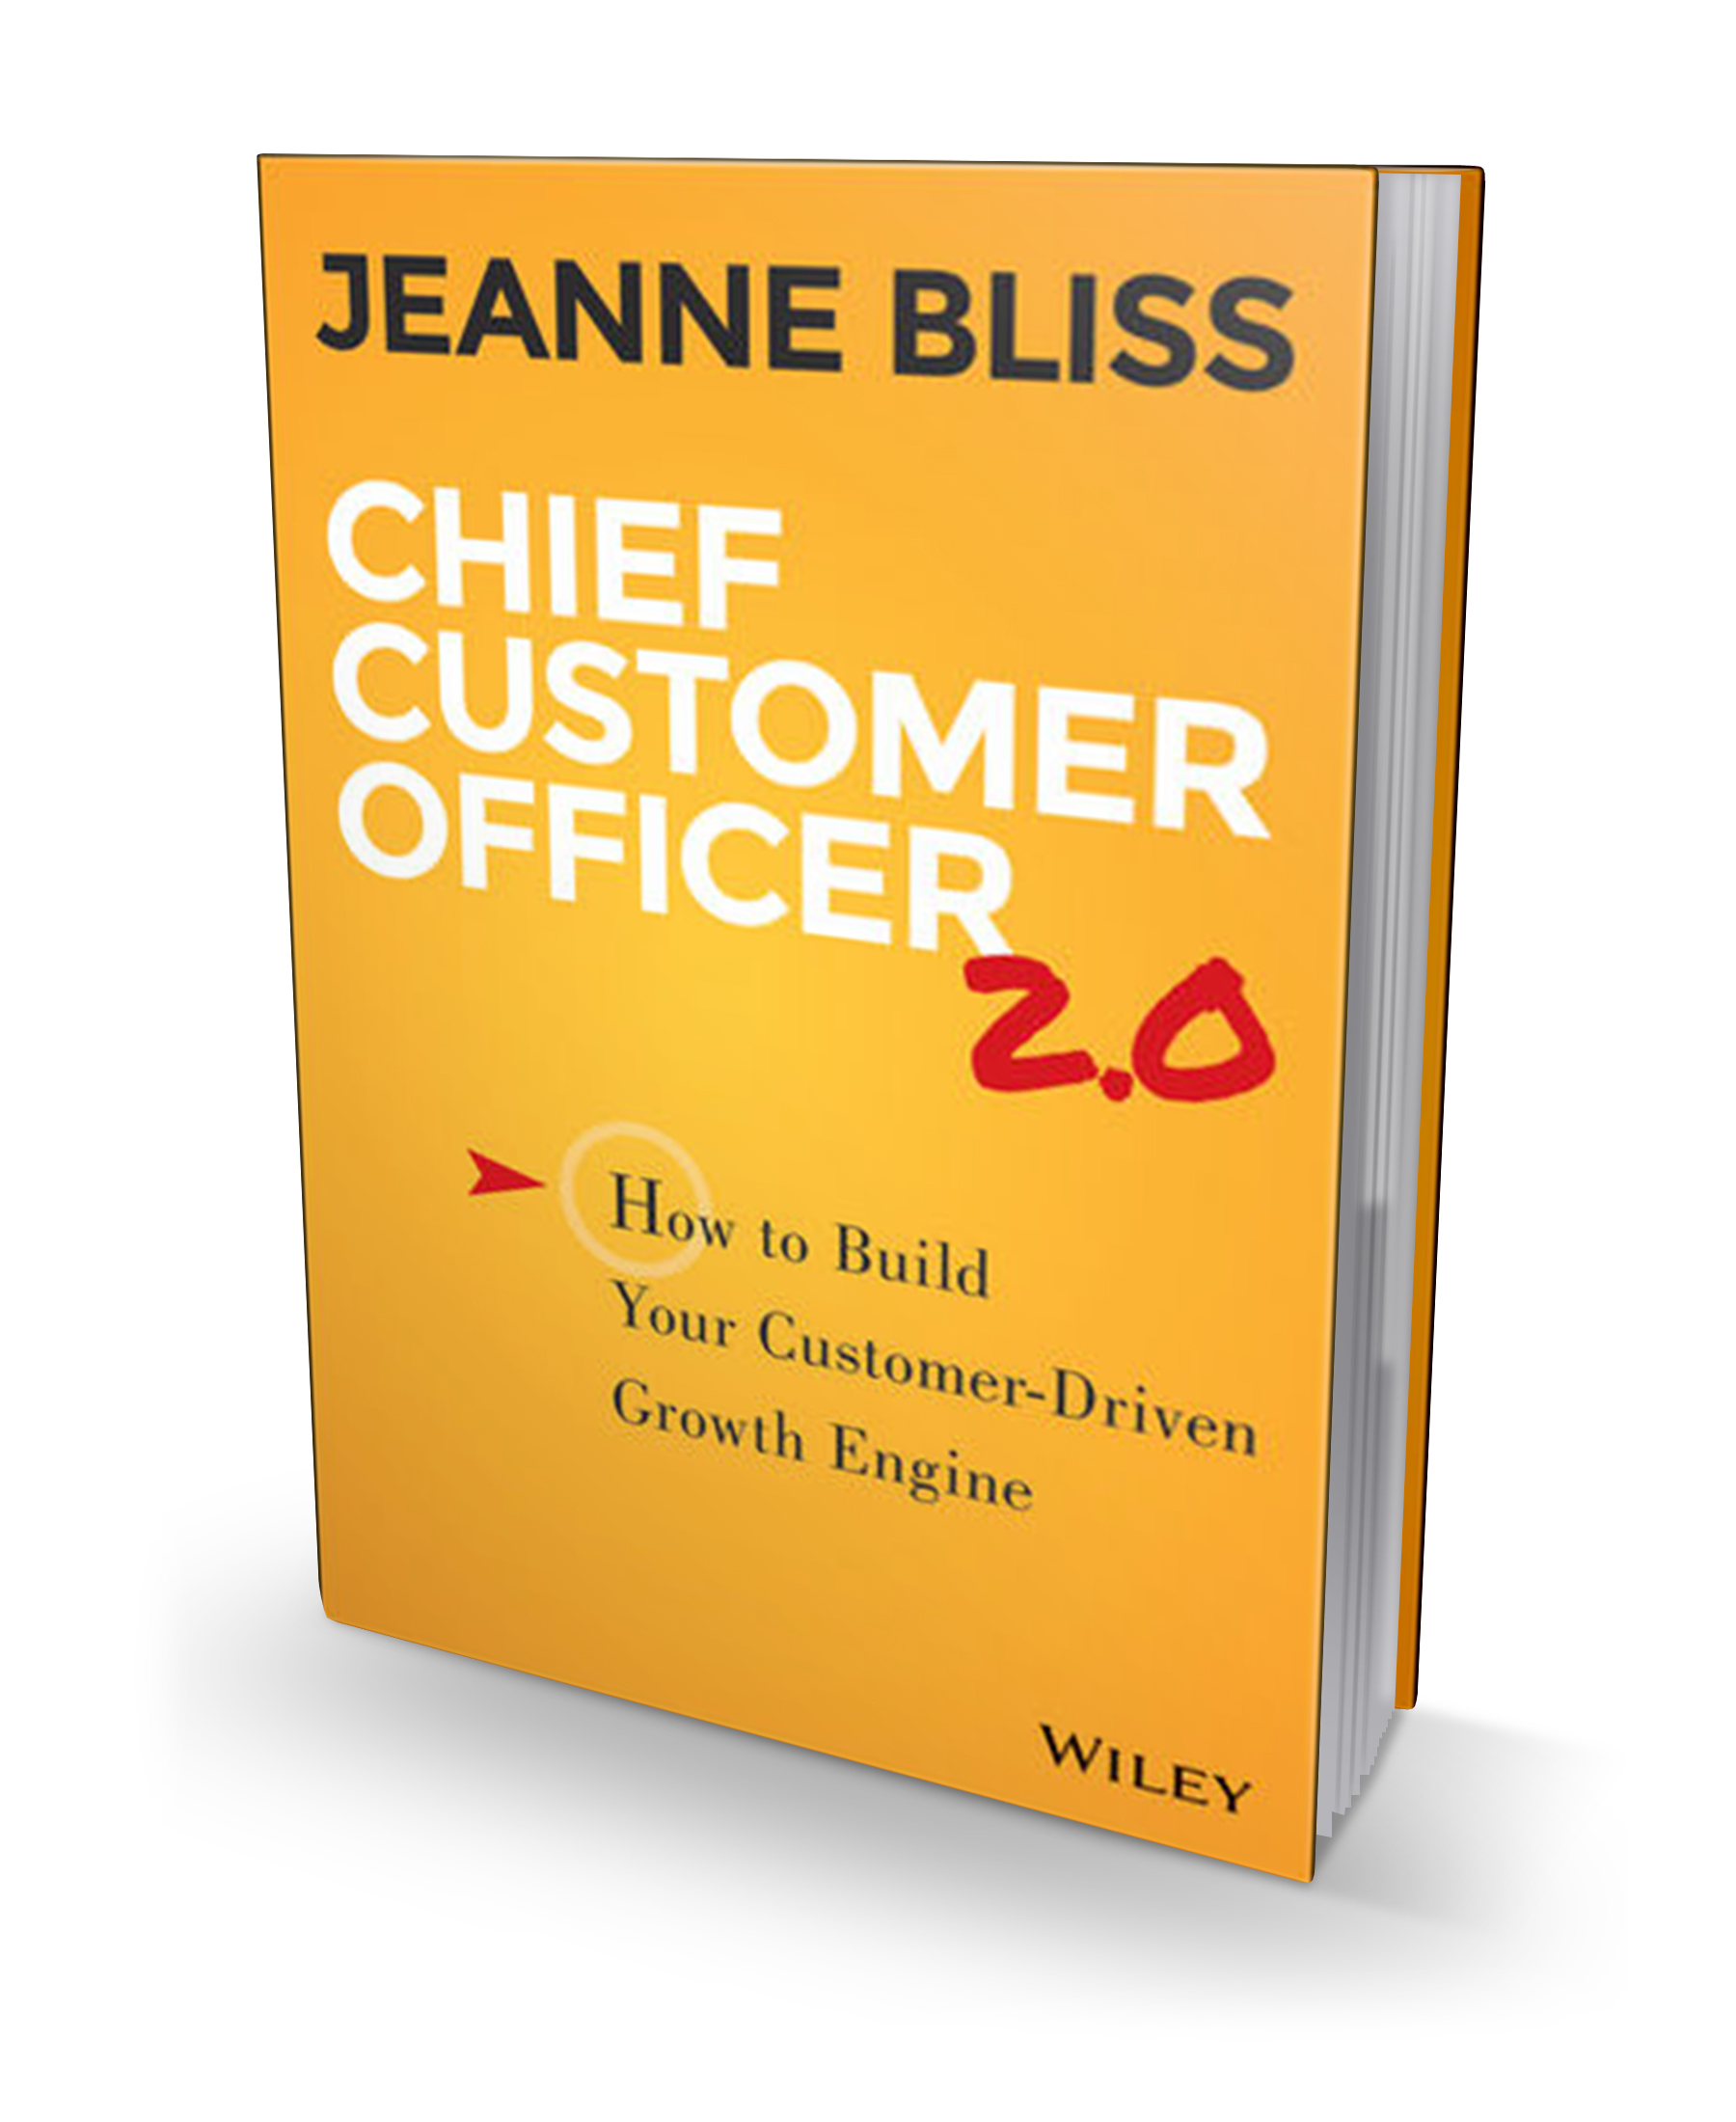 Chief Customer Officer 2.0 by Jeanne Bliss